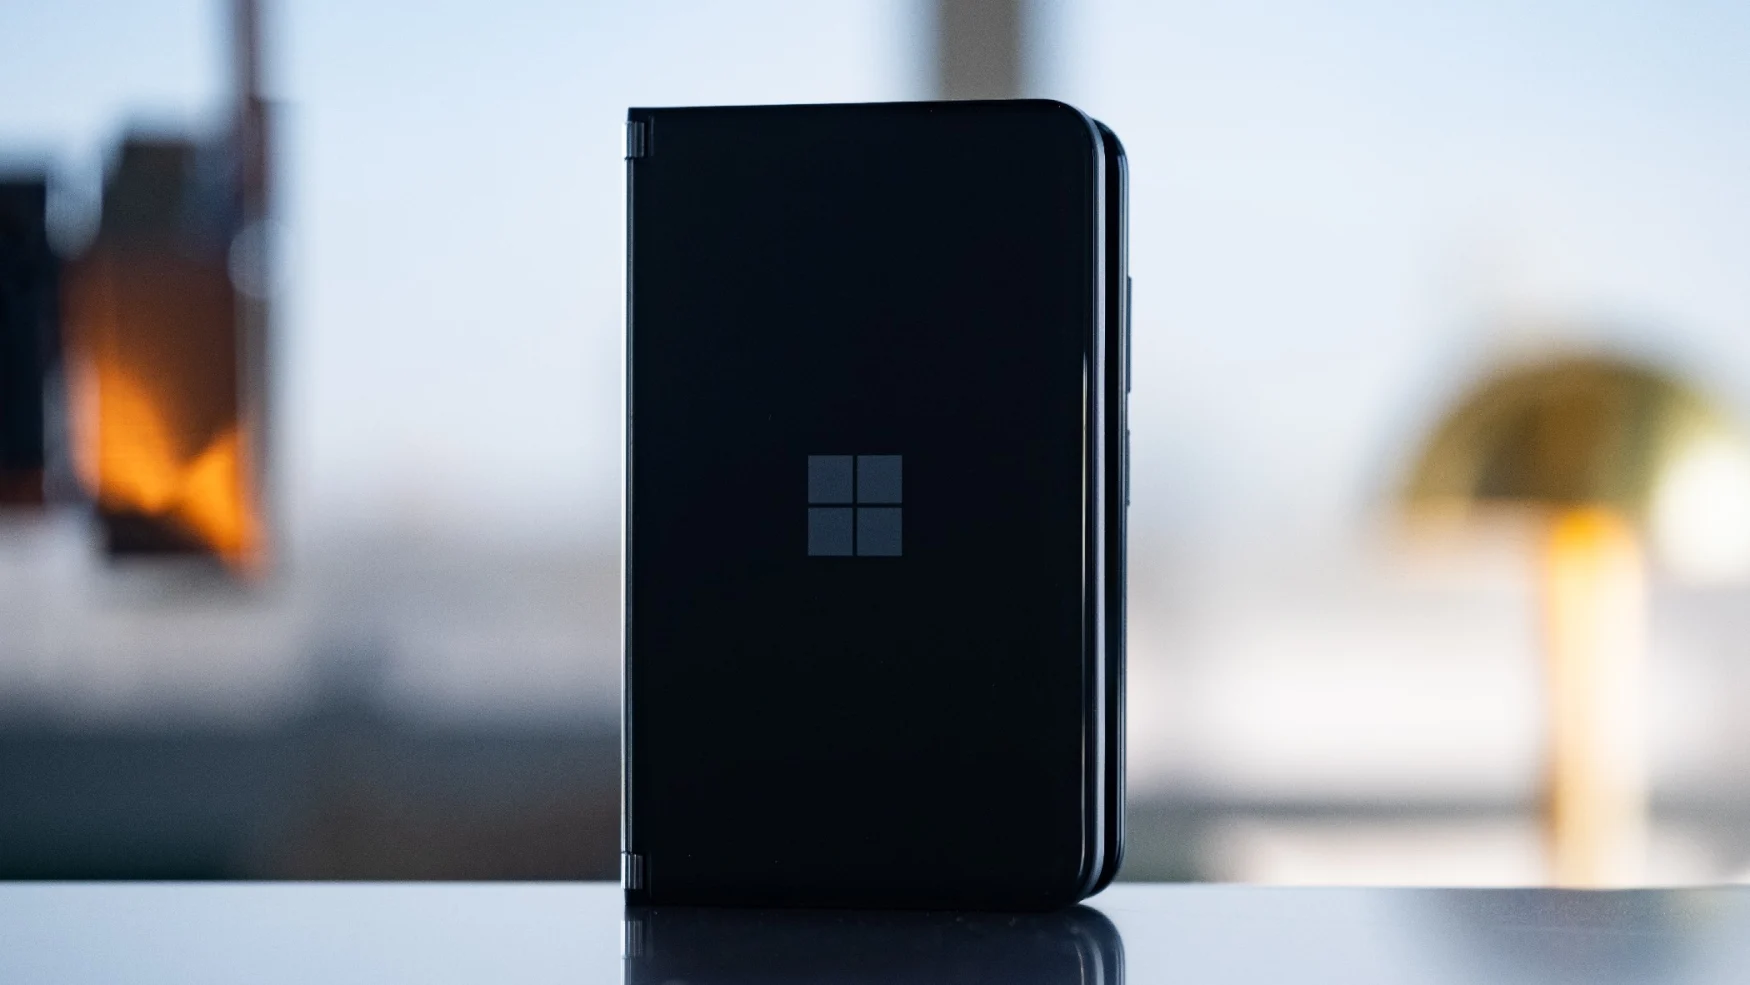 The Microsoft Surface Duo 2 stands almost closed, with the logo on its back facing the camera.